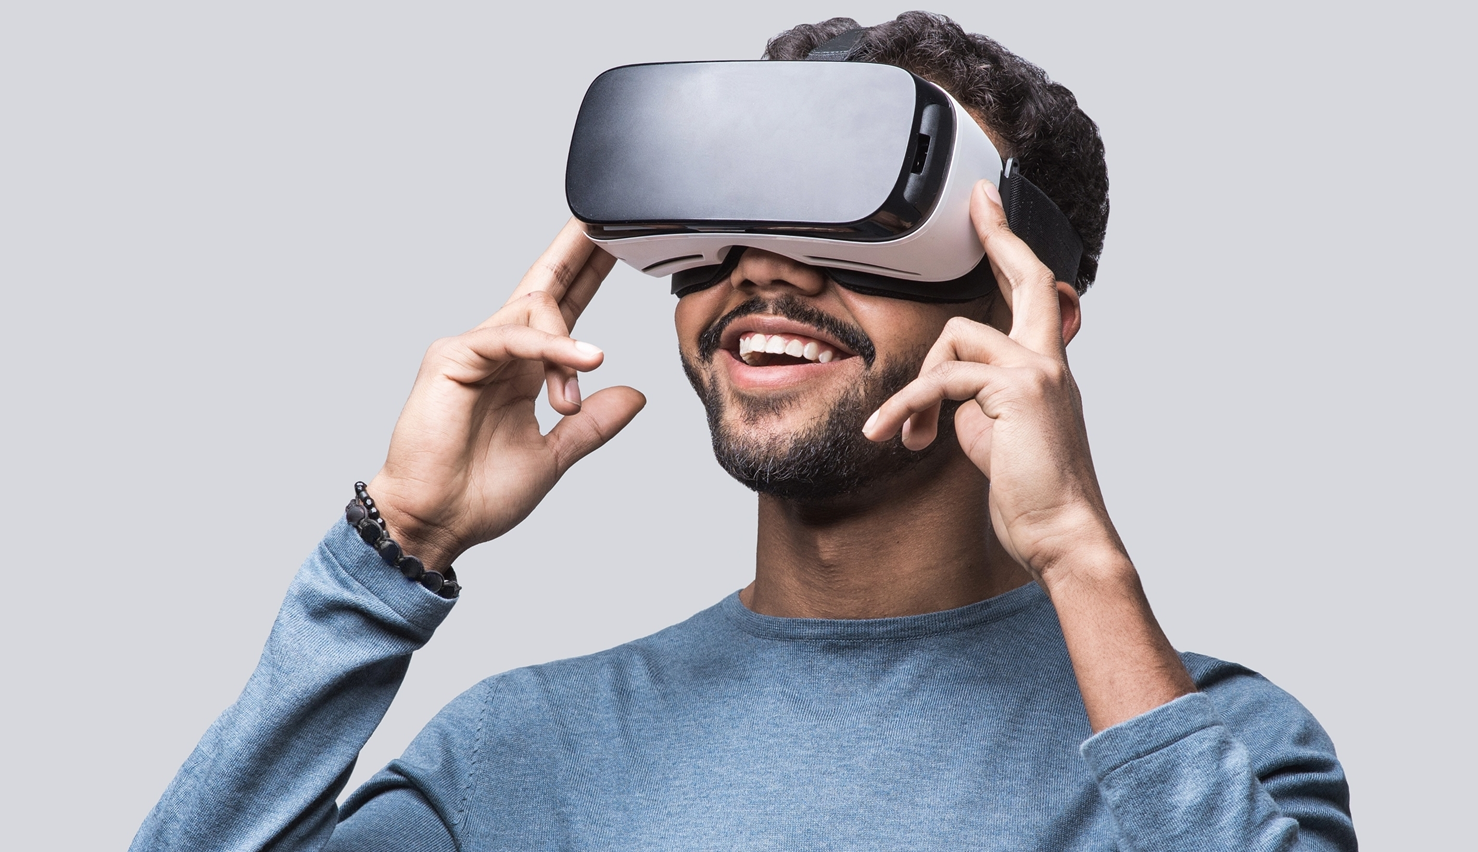 A young man smiling, while he is wearing virtual reality glasses